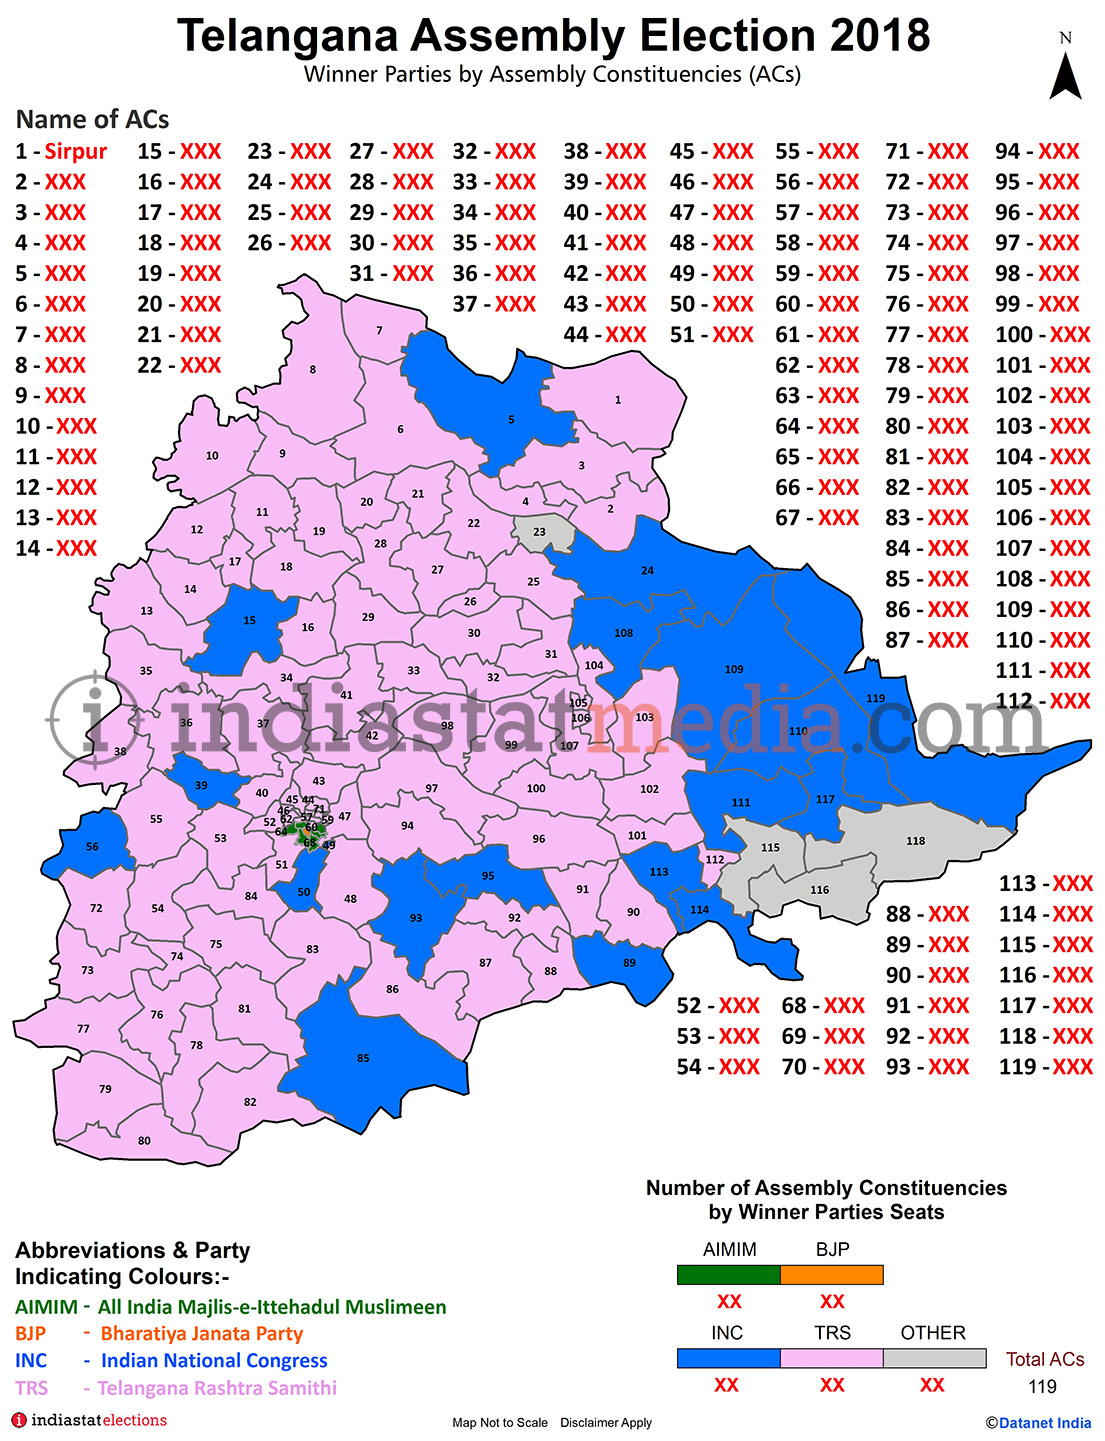 Winner Parties by Assembly Constituencies in Telangana (Assembly Election - 2018)